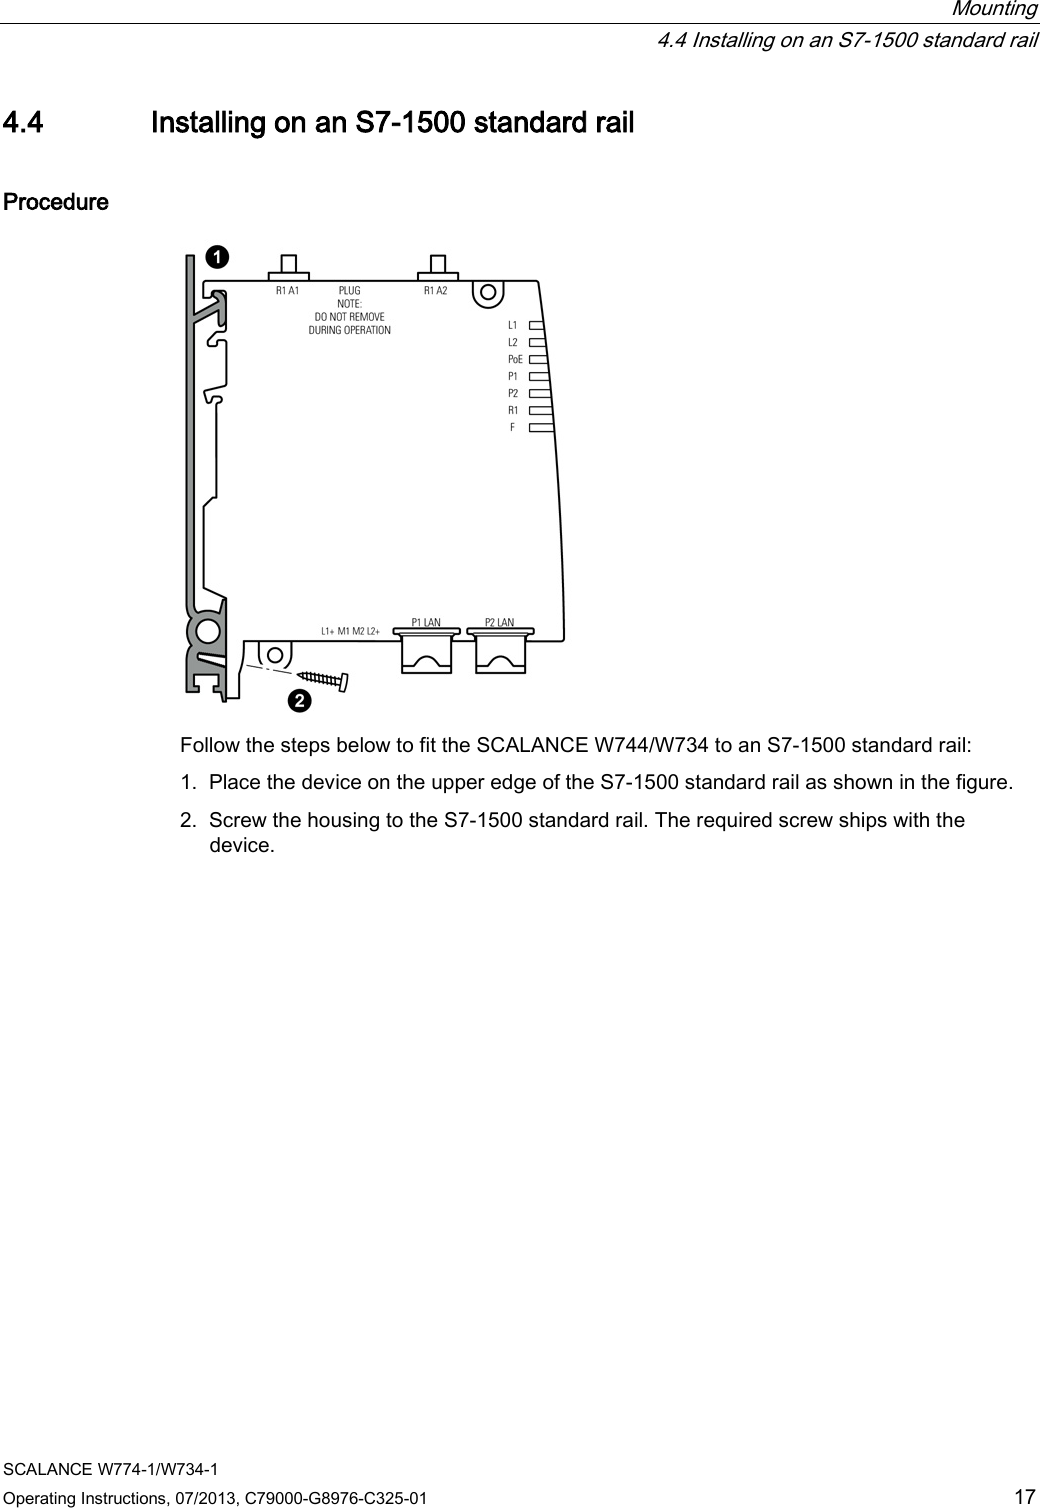  Mounting  4.4 Installing on an S7-1500 standard rail SCALANCE W774-1/W734-1 Operating Instructions, 07/2013, C79000-G8976-C325-01 17 4.4 Installing on an S7-1500 standard rail Procedure  Follow the steps below to fit the SCALANCE W744/W734 to an S7-1500 standard rail: 1. Place the device on the upper edge of the S7-1500 standard rail as shown in the figure. 2. Screw the housing to the S7-1500 standard rail. The required screw ships with the device. 